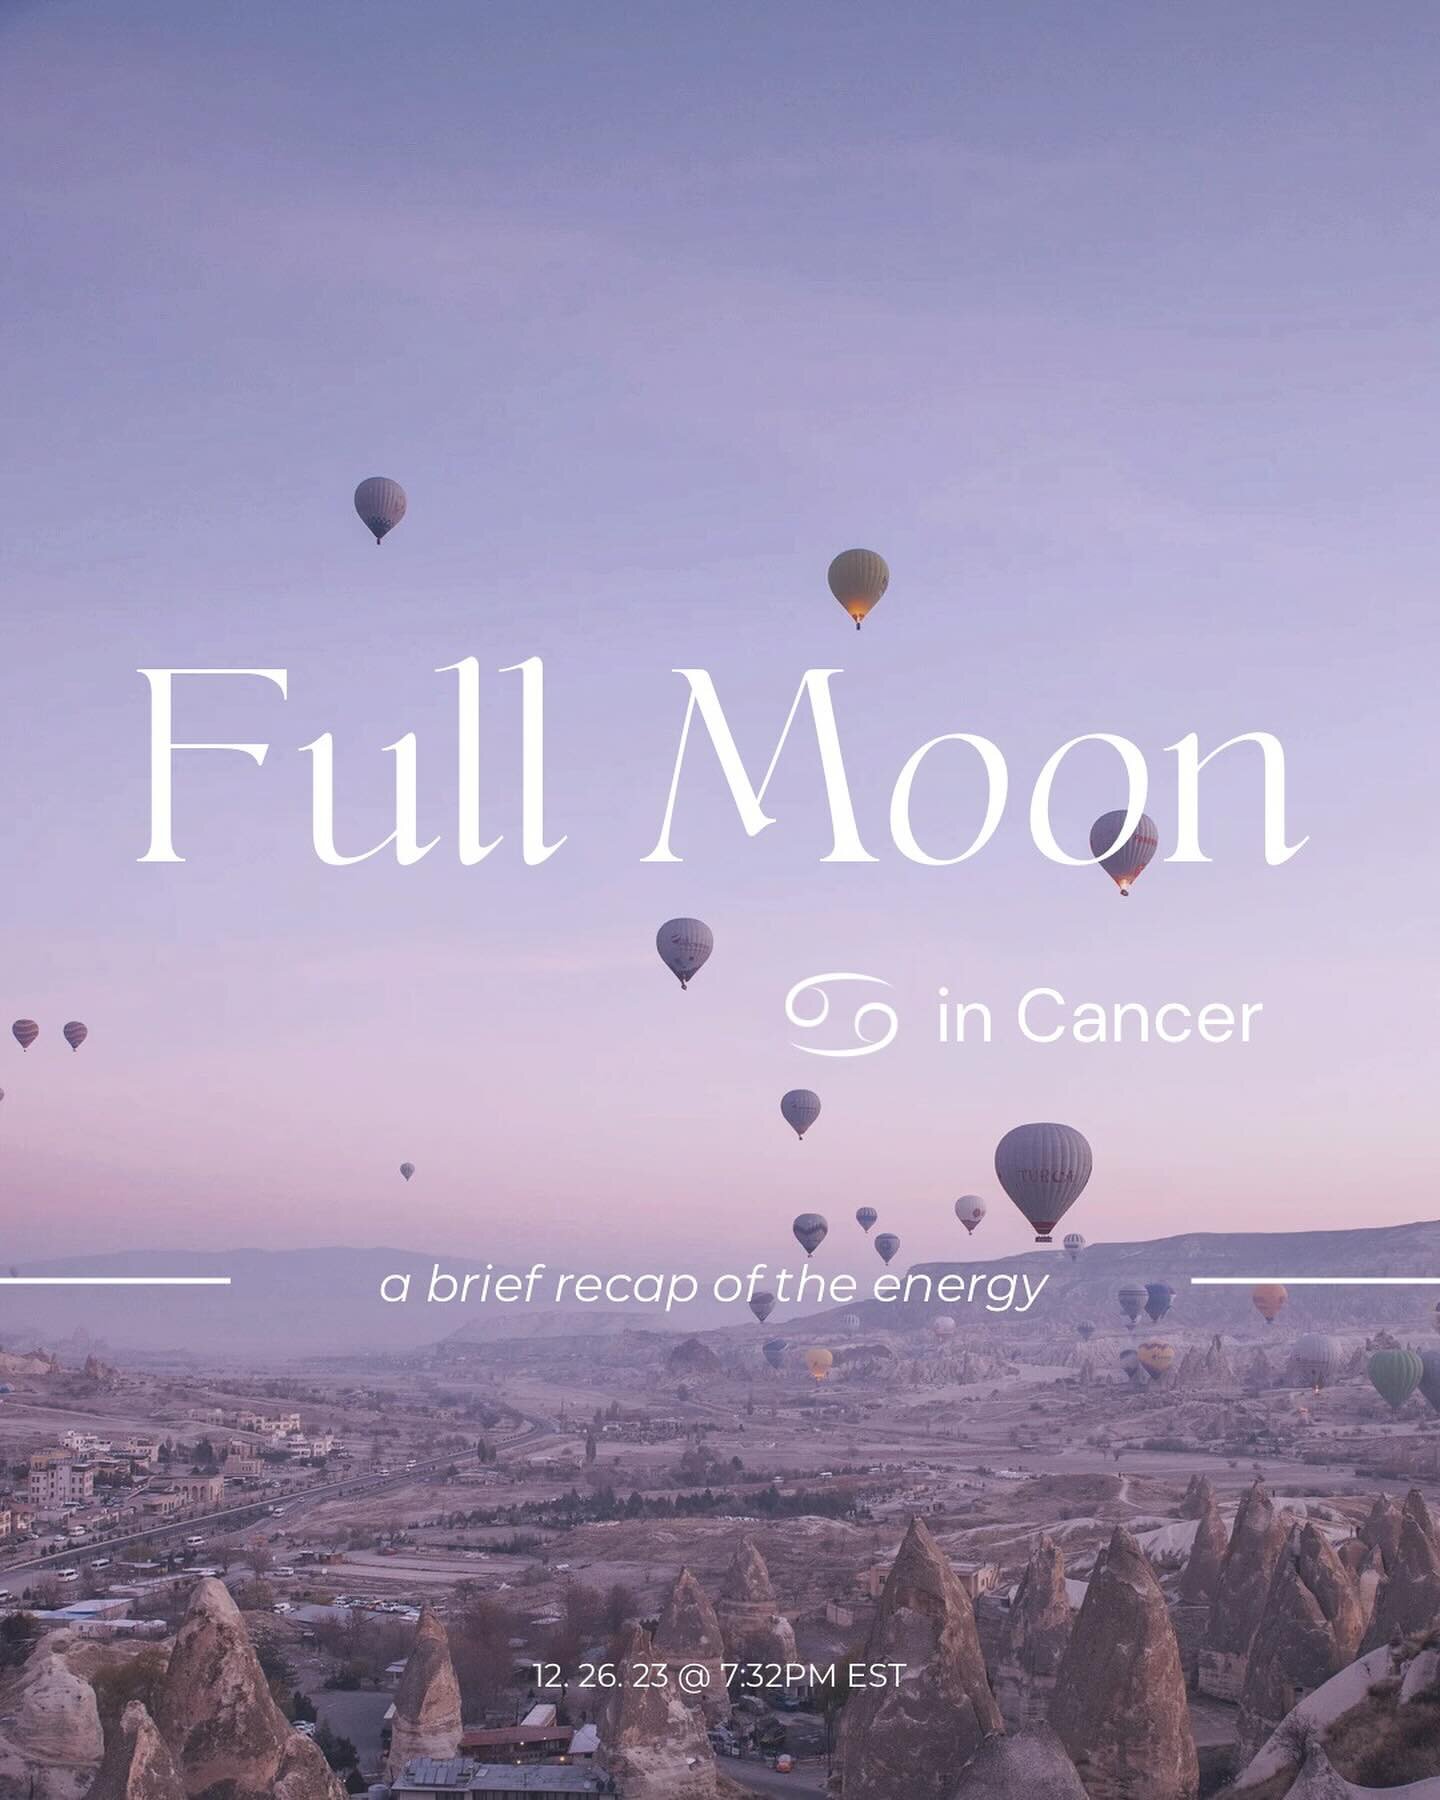 FULL MOON IN CANCER ♋️ 

Today at 7:32 PM EST we have the Full Moon in Cancer at 4&deg;. This Full Moon is asking us to release thought patterns and beliefs that haven&rsquo;t been fruitful or helpful for us. 

This is a pretty busy Moon cycle as we 